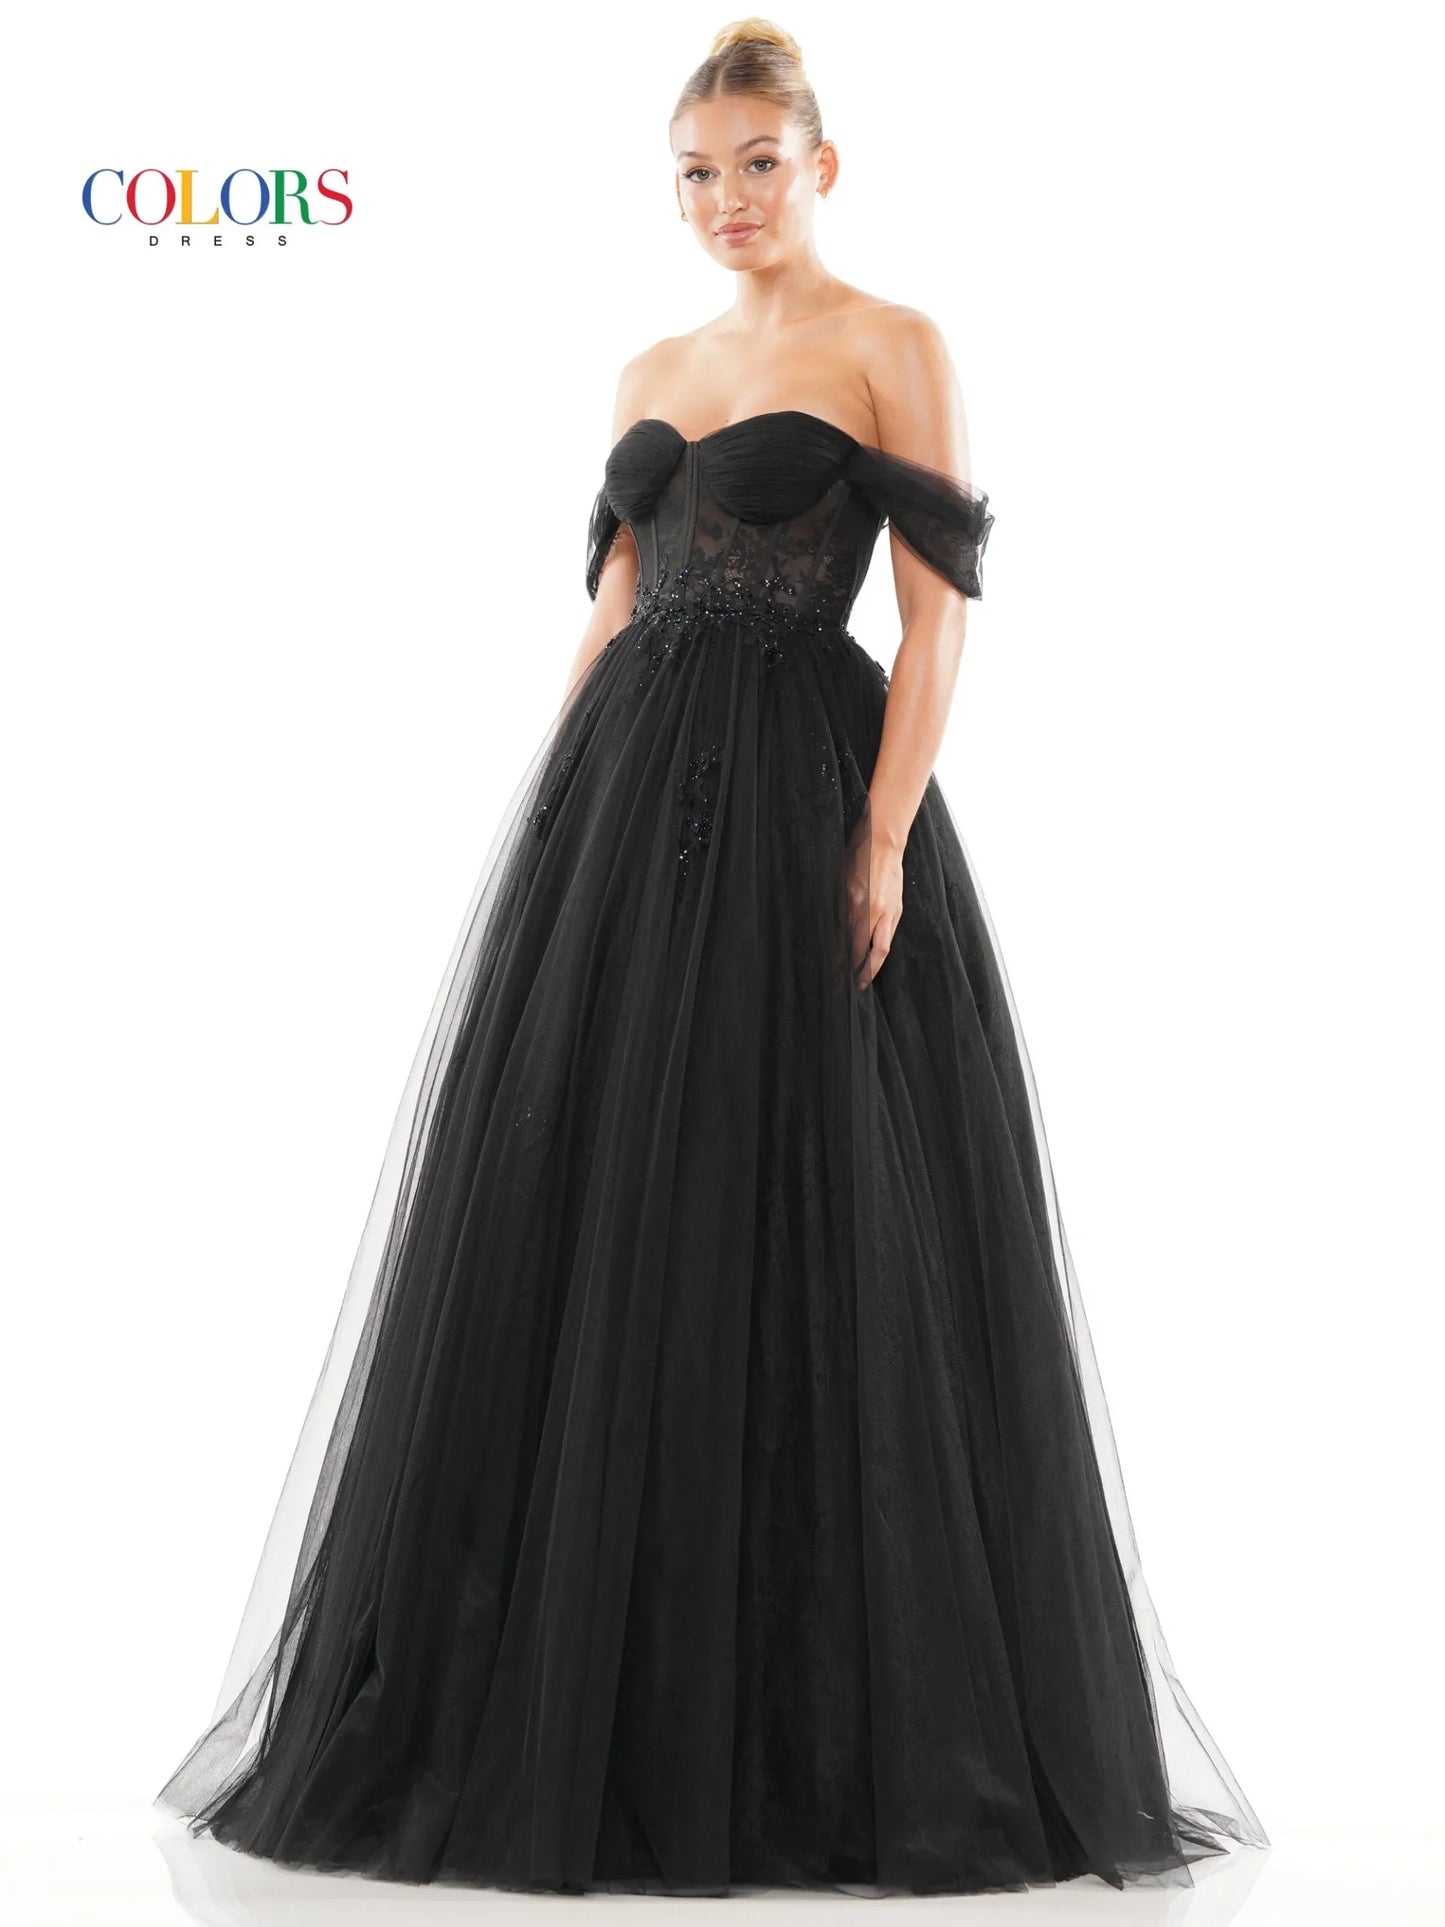 This stunning Colors Dress 3240 features intricate lace appliques and sparkling crystal accents that add a touch of elegance to the long sheer corset ballgown. The off-the-shoulder A-line design creates a flattering silhouette, making it the perfect choice for a prom or special event. Perfect Black wedding Dress!  Sizes: 0-22  Colors: Black, Light Blue, Off White, Red, Deep Green